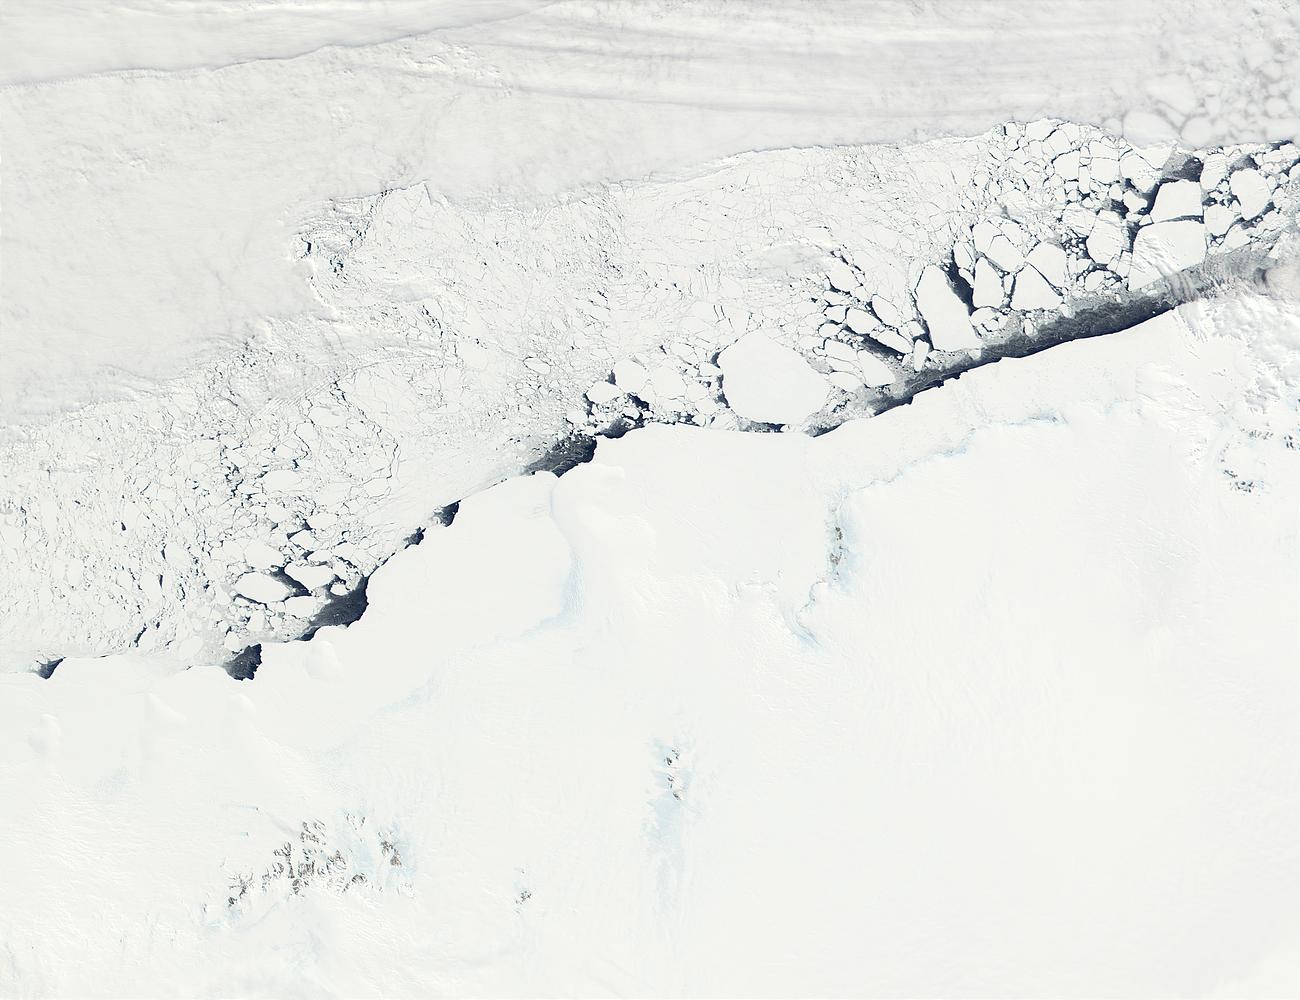 Prince Harald Coast, Prince Olav Coast, and Enderby Land, Antarctica - related image preview